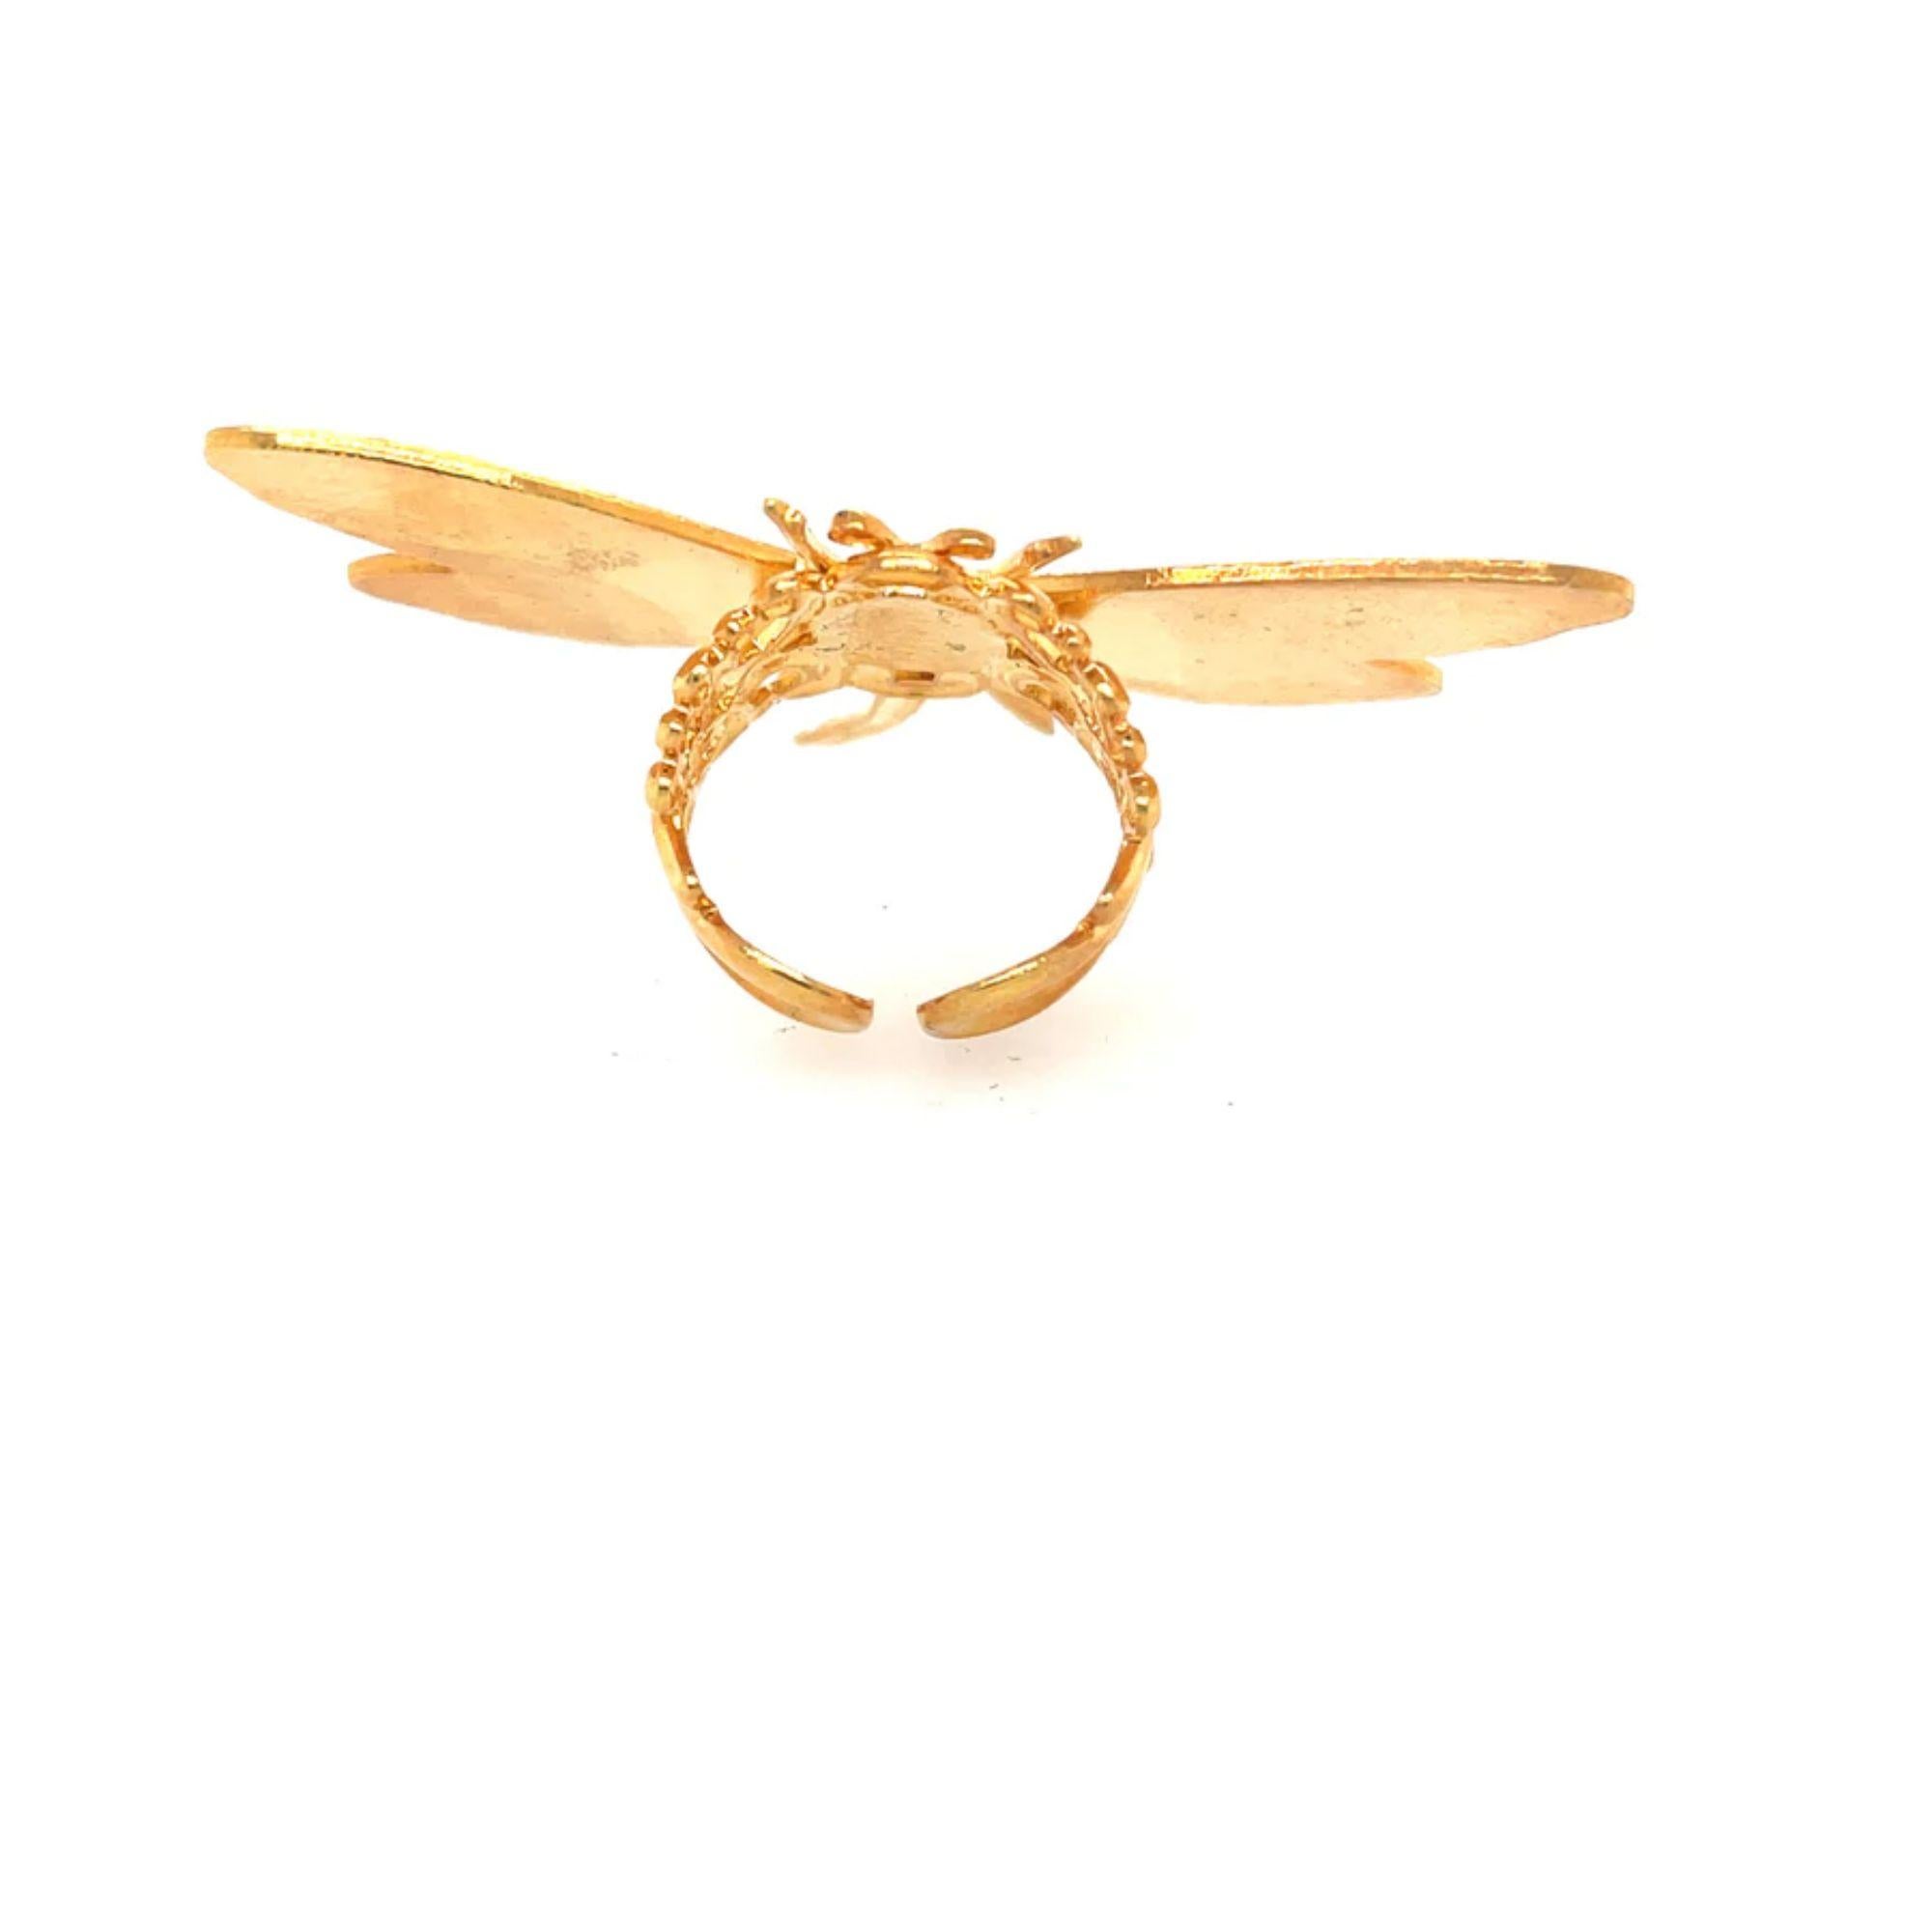 Part of the Mordekai enchanted forest collection, this stunning ring is a great start for your Mordekai collection. Made in America.Plated on Brass

Additional Information:
Material: Gold, Brass
Dimensions: W 2.25 x L 0.625 x H 1in 
Diameter: 0.625